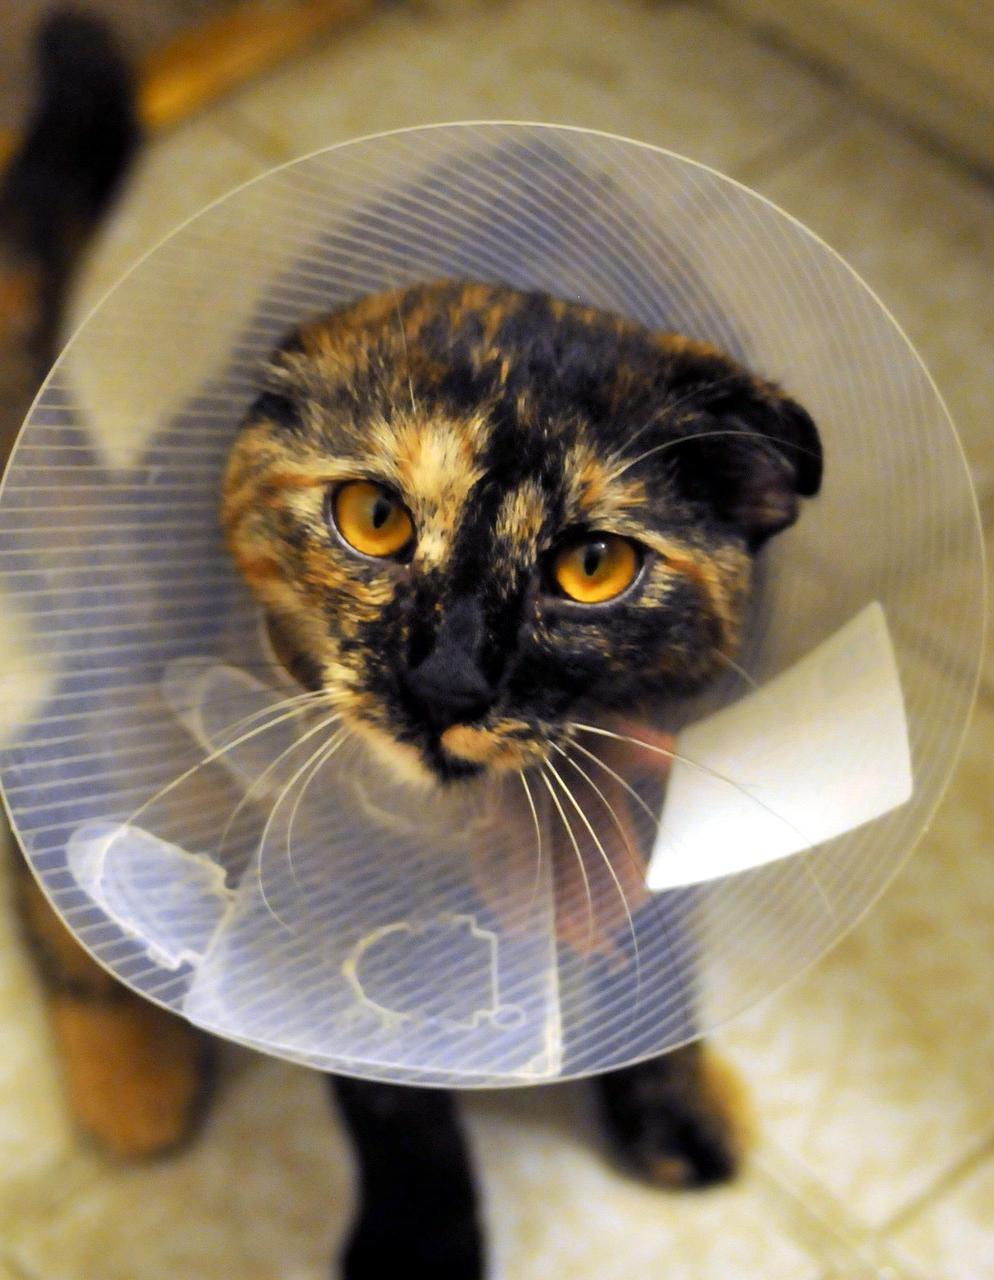 How Long Should a Cat Wear a Cone After Neutering?